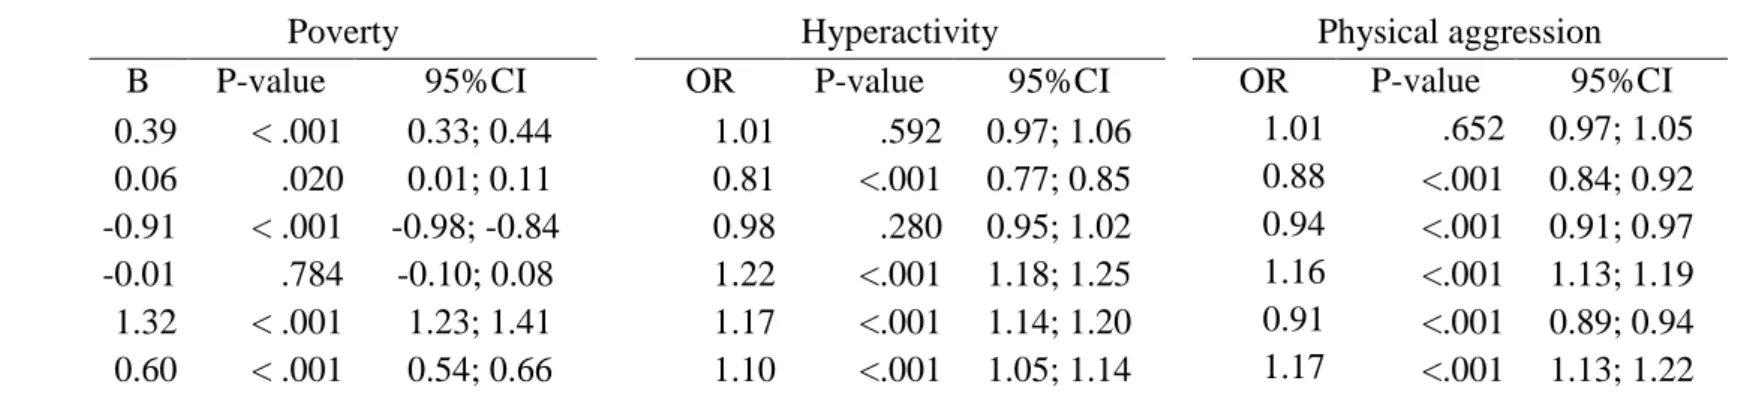 Table 5. Multiple logistic and linear regressions models for selecting potential mediators